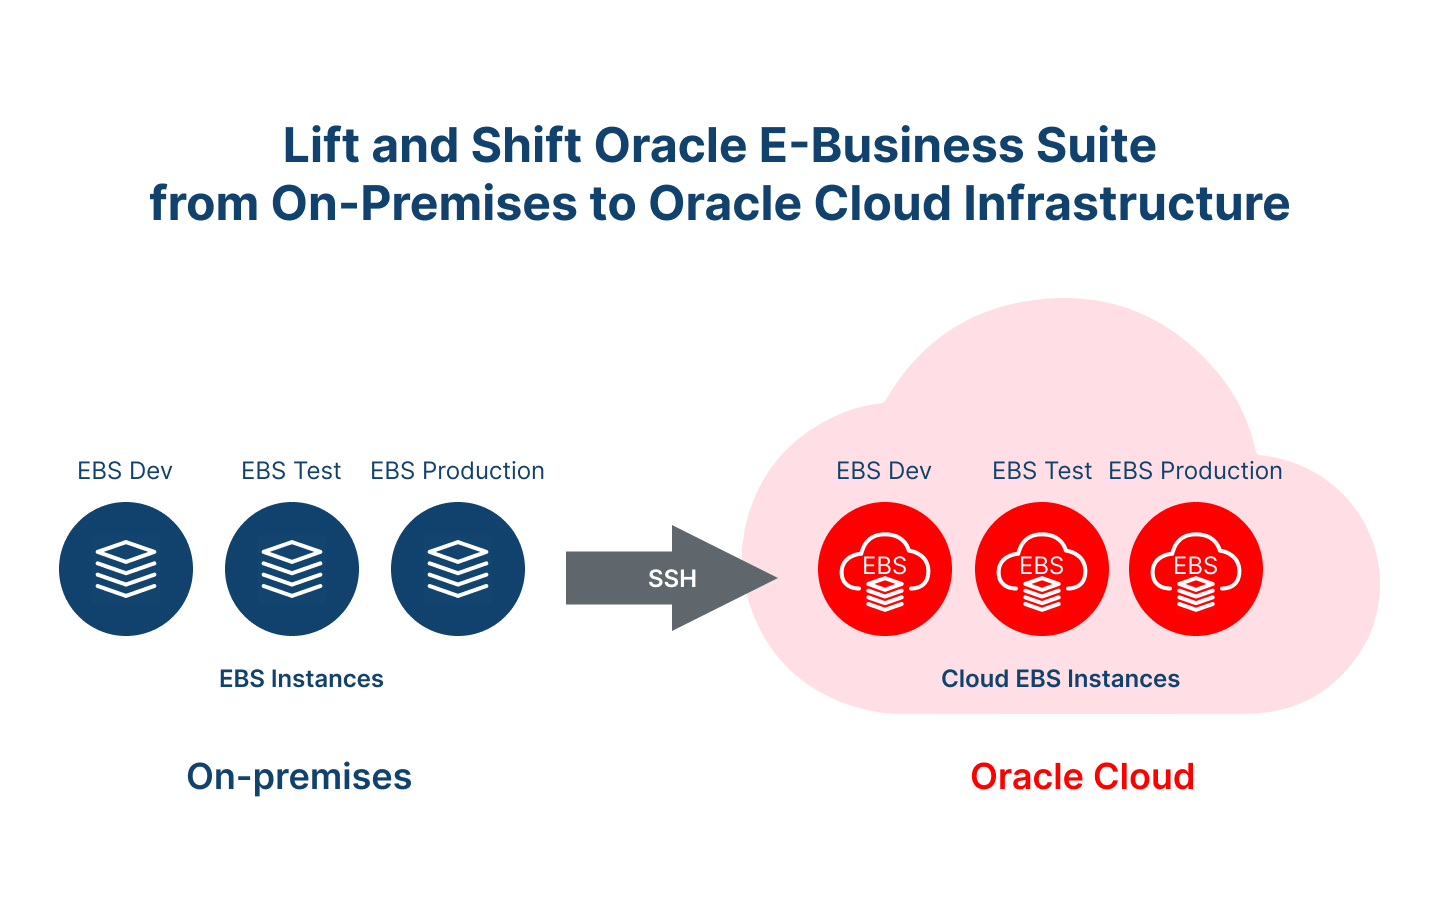 Lift and Shift Oracle E-Business Suite from On-Premises to Oracle Cloud Infrastructure